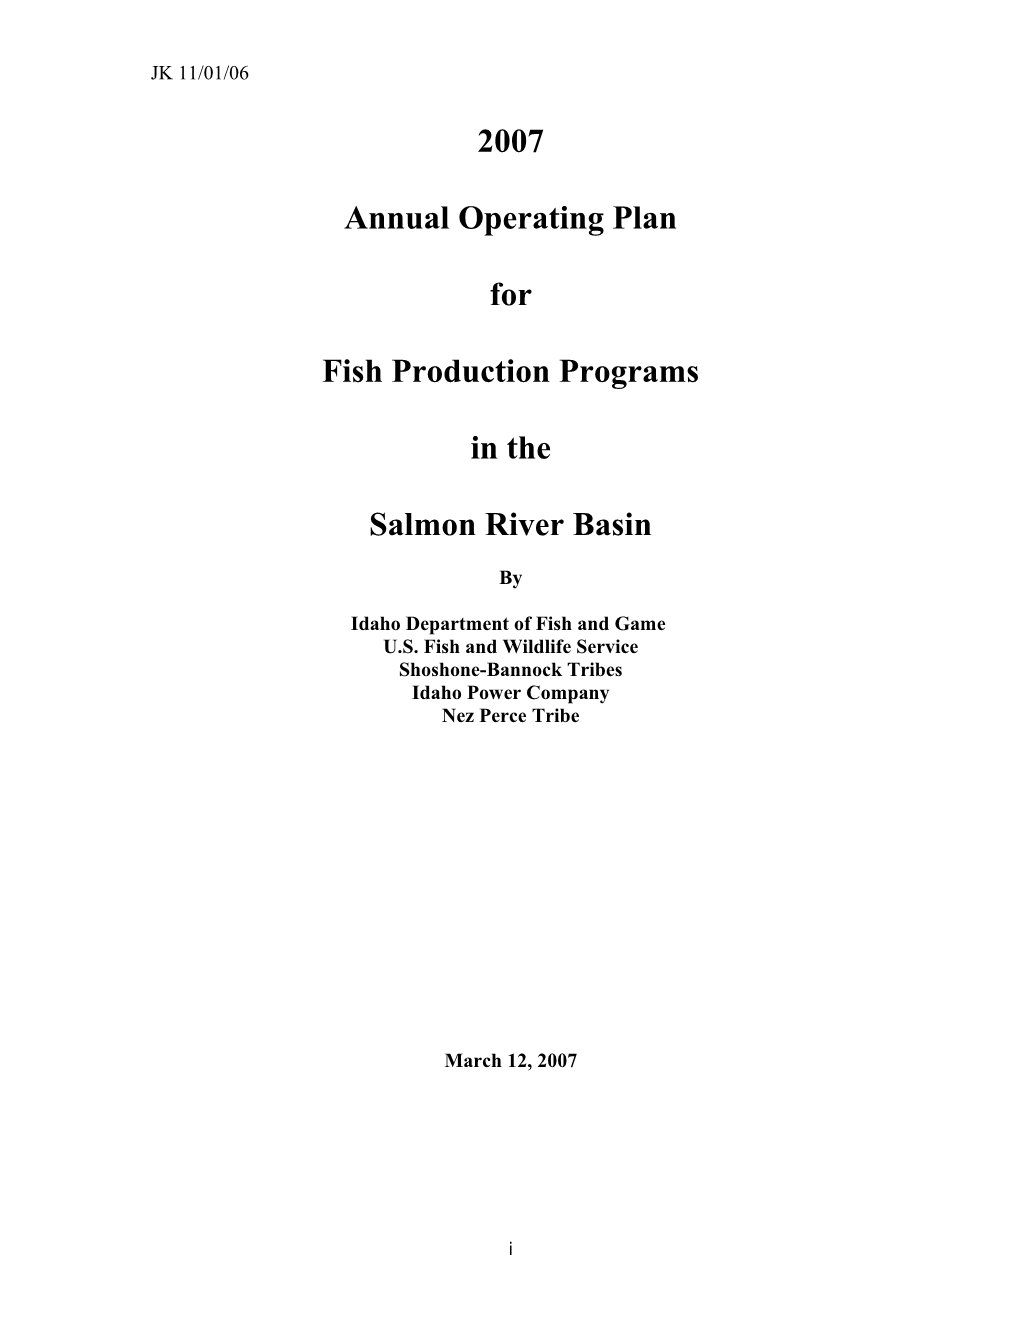 2005 Annual Operating Plan for Fish Production Programs in the Salmon River Basin